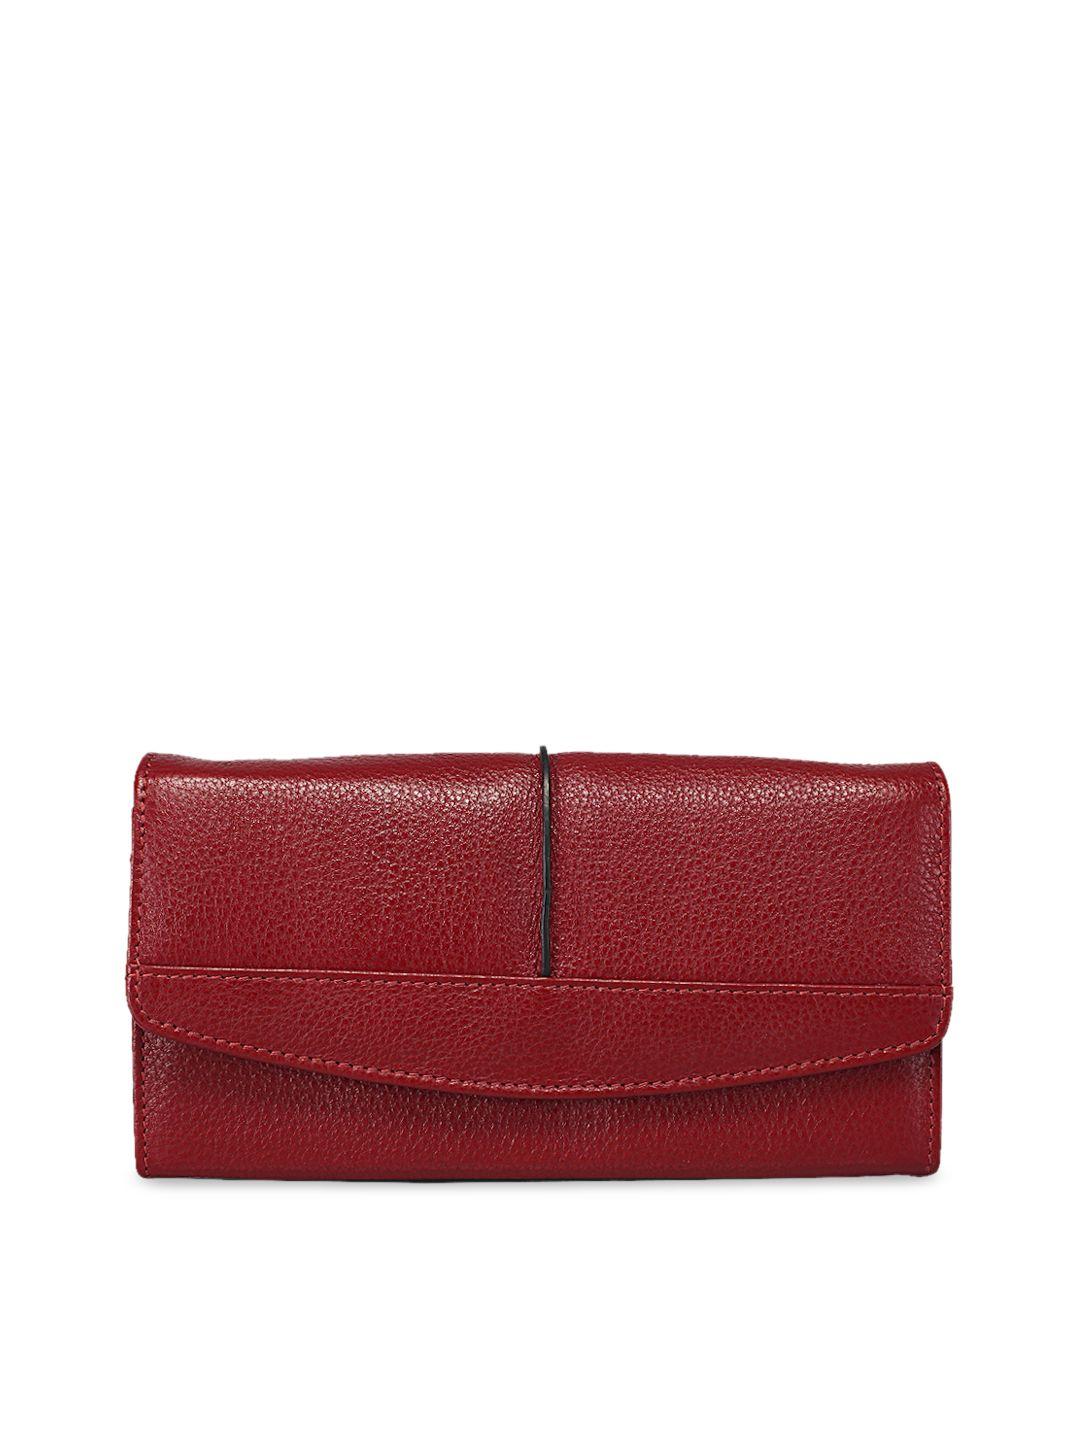 genwayne red solid leather clutch